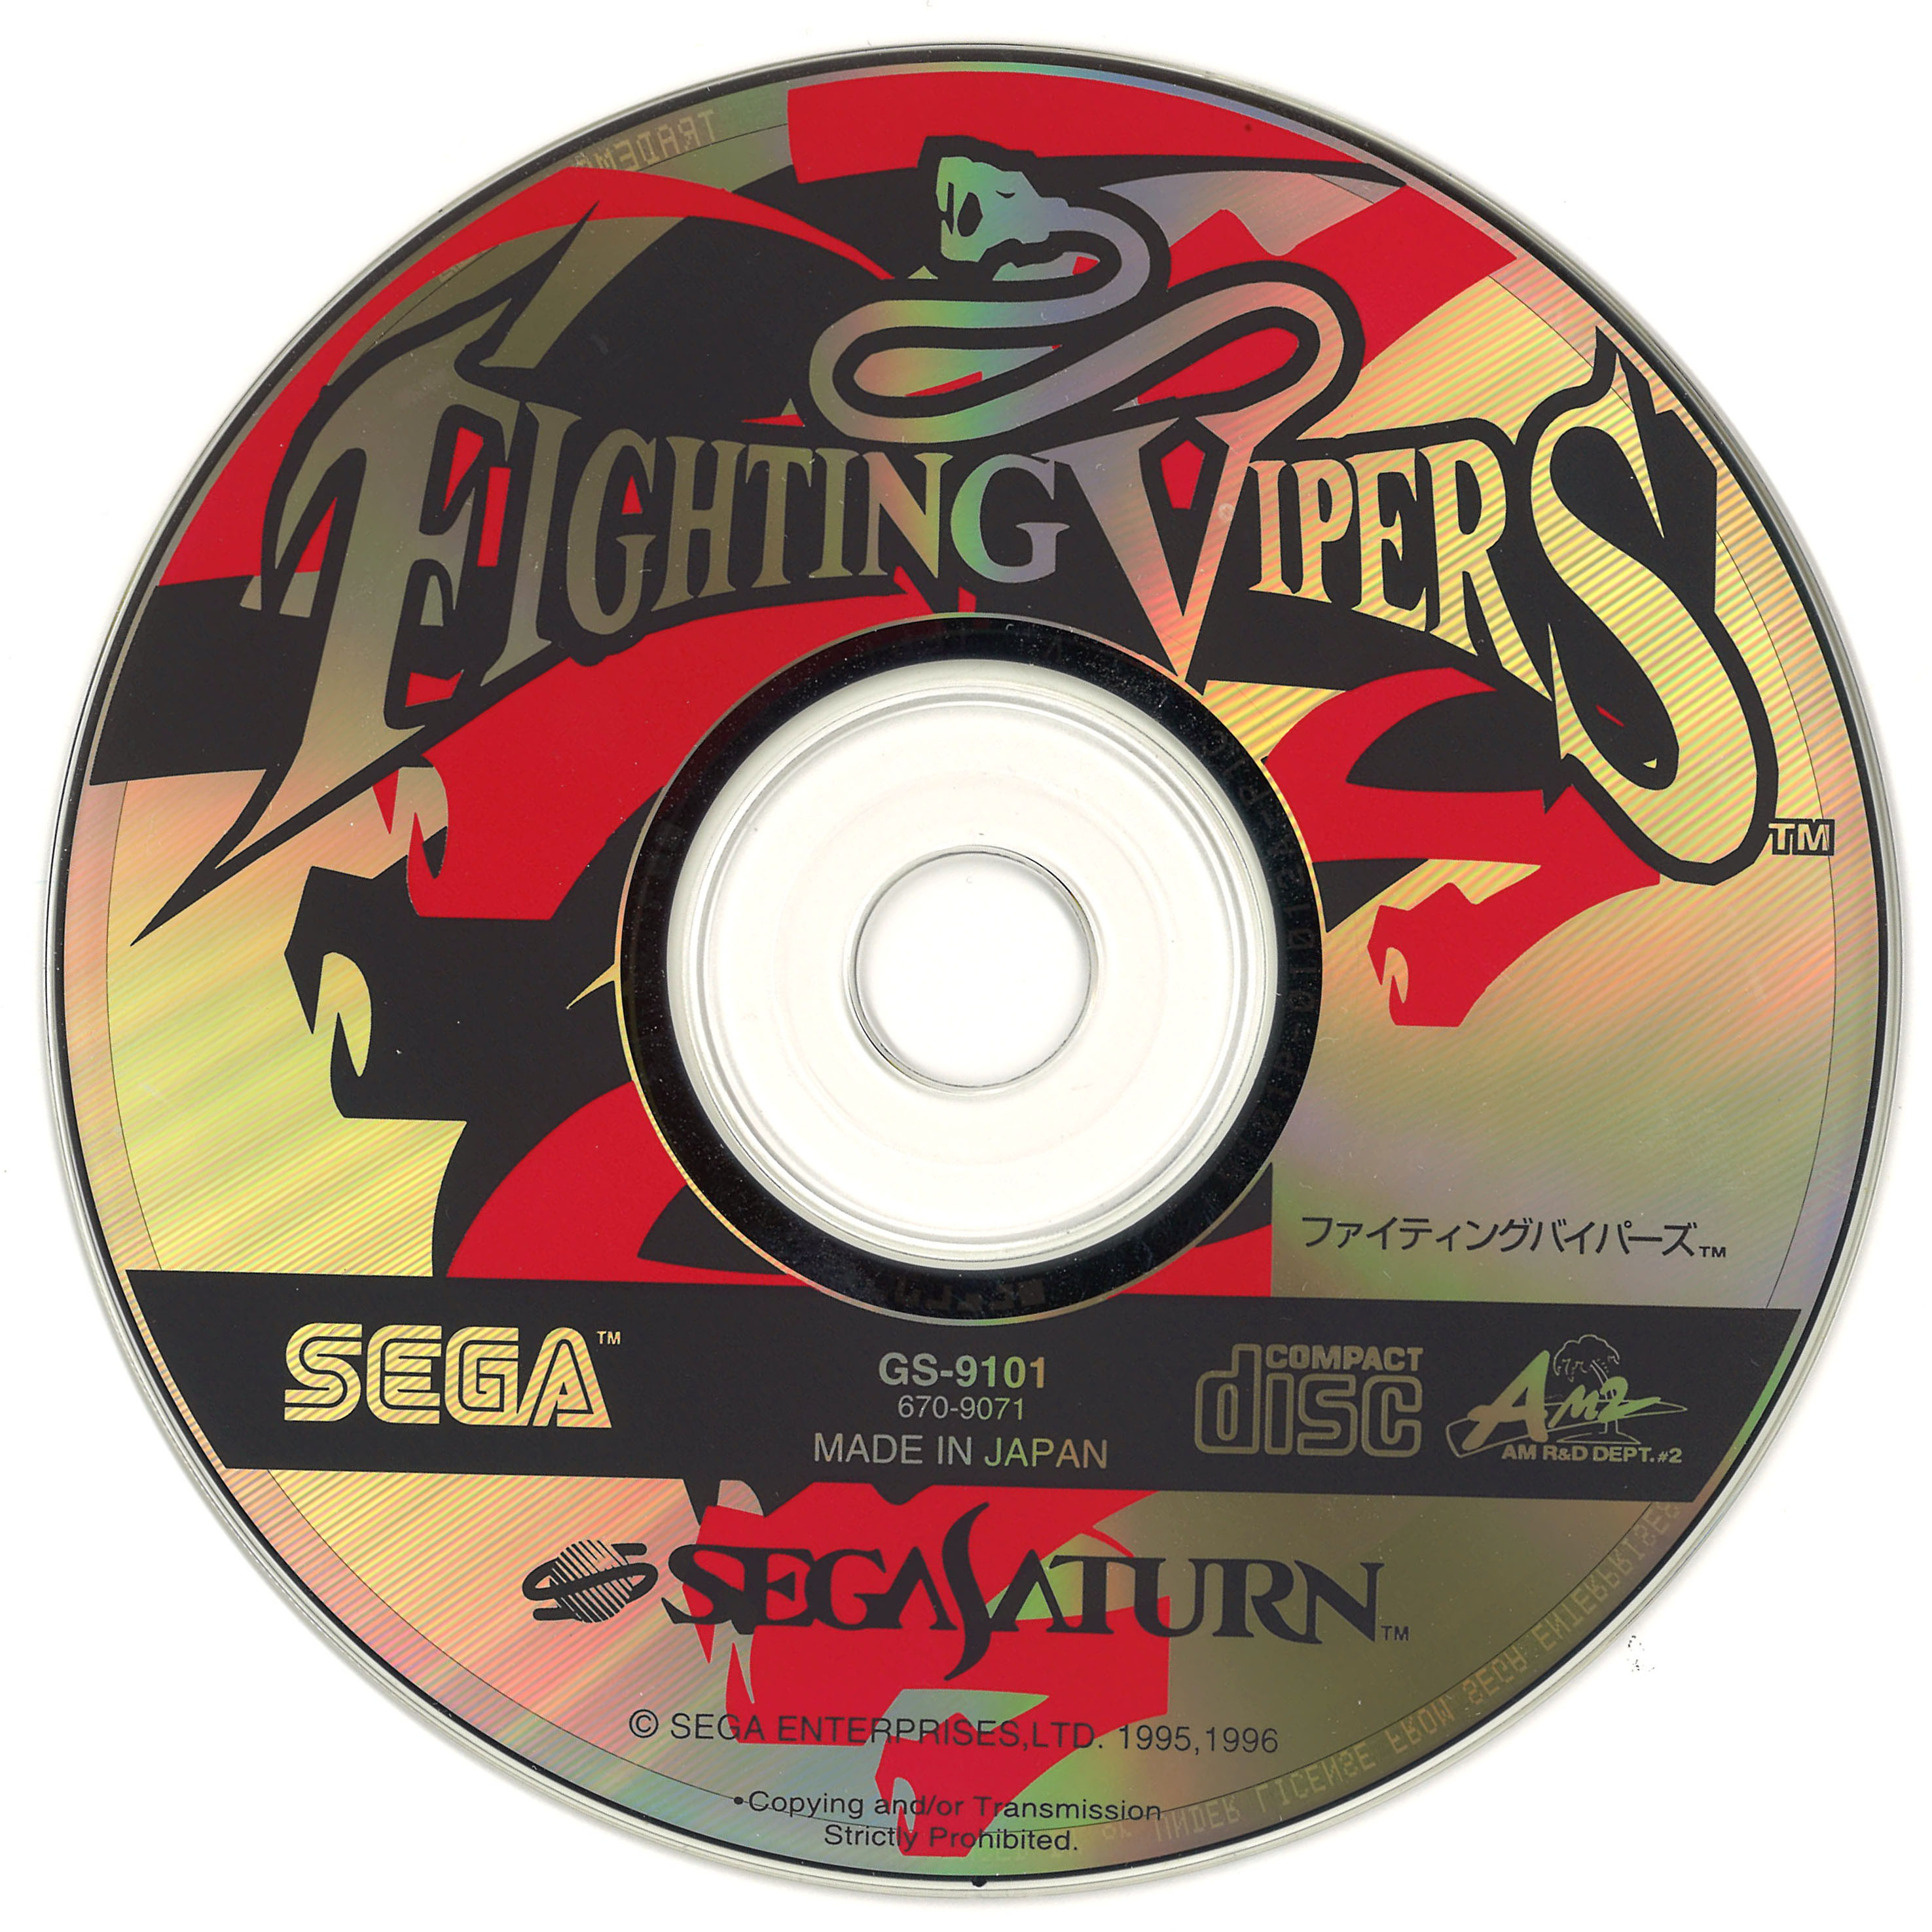 download fighting vipers ps2